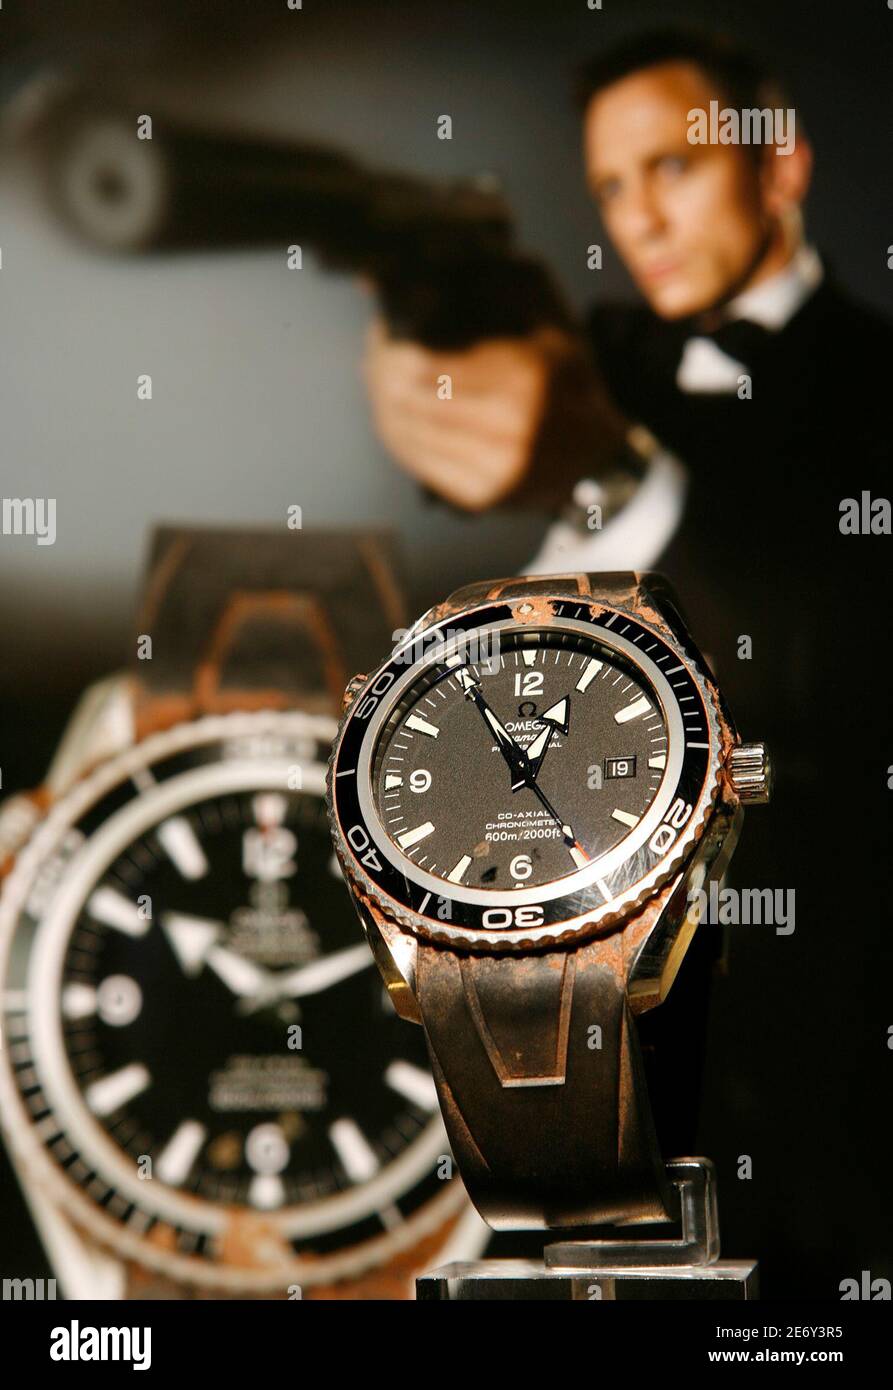 The Omega, 'Seamaster Planet Ocean' watch worn by Daniel Craig during the  filming of 'Casino Royale' in 2005/2006, is pictured in front of a  promotional photo during a preview at Antiquorum auction